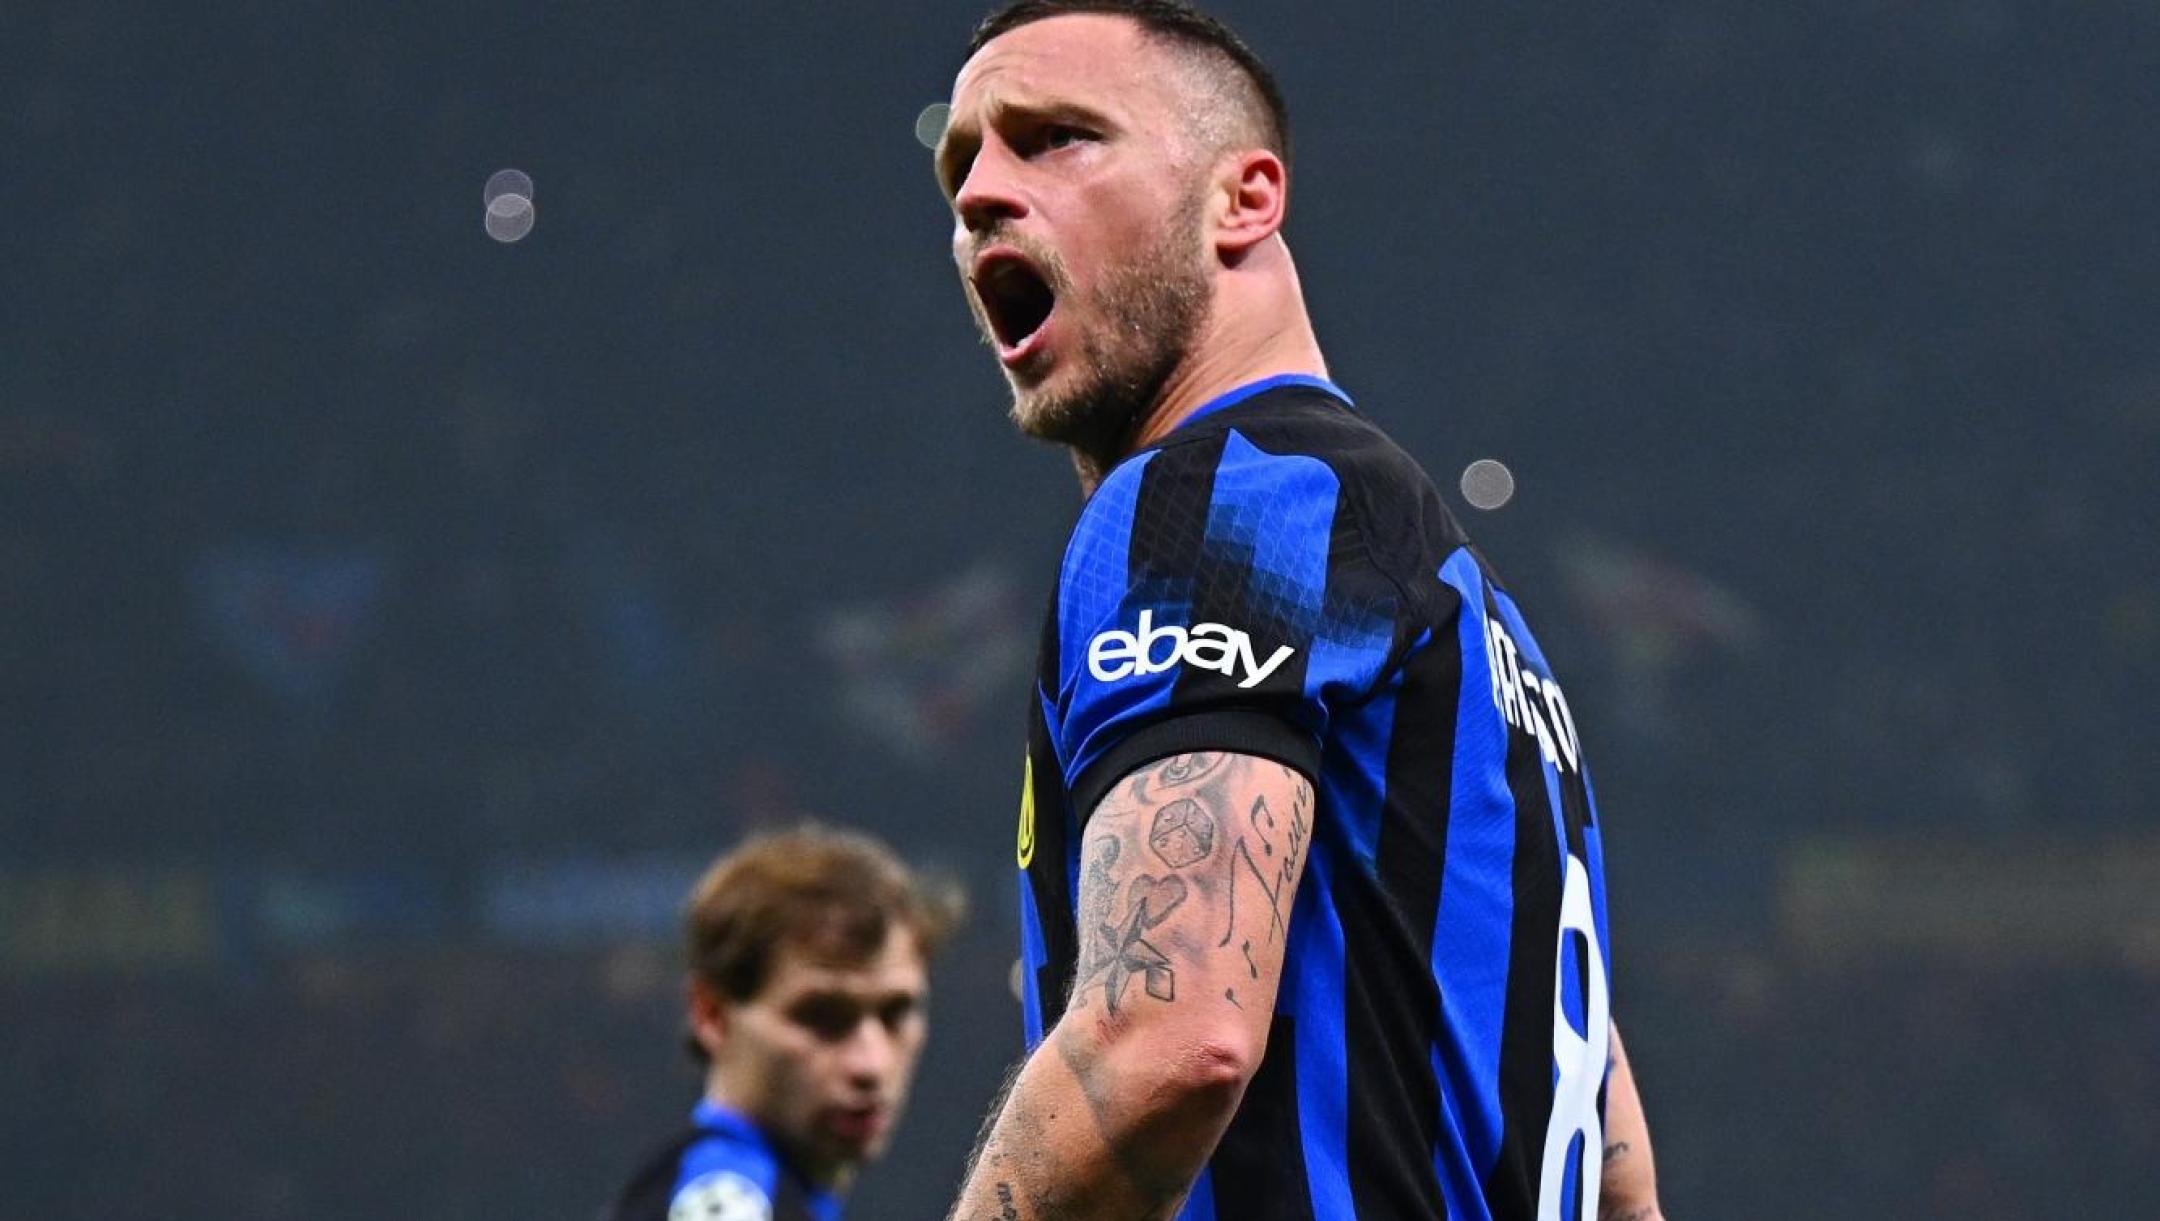 MILAN, ITALY - FEBRUARY 20: Marko Arnautovic of FC Internazionale celebrates after scoring their team's first goal during the UEFA Champions League 2023/24 round of 16 first leg match between FC Internazionale and Atletico Madrid at Stadio Giuseppe Meazza on February 20, 2024 in Milan, Italy. (Photo by Mattia Ozbot - Inter/Inter via Getty Images)